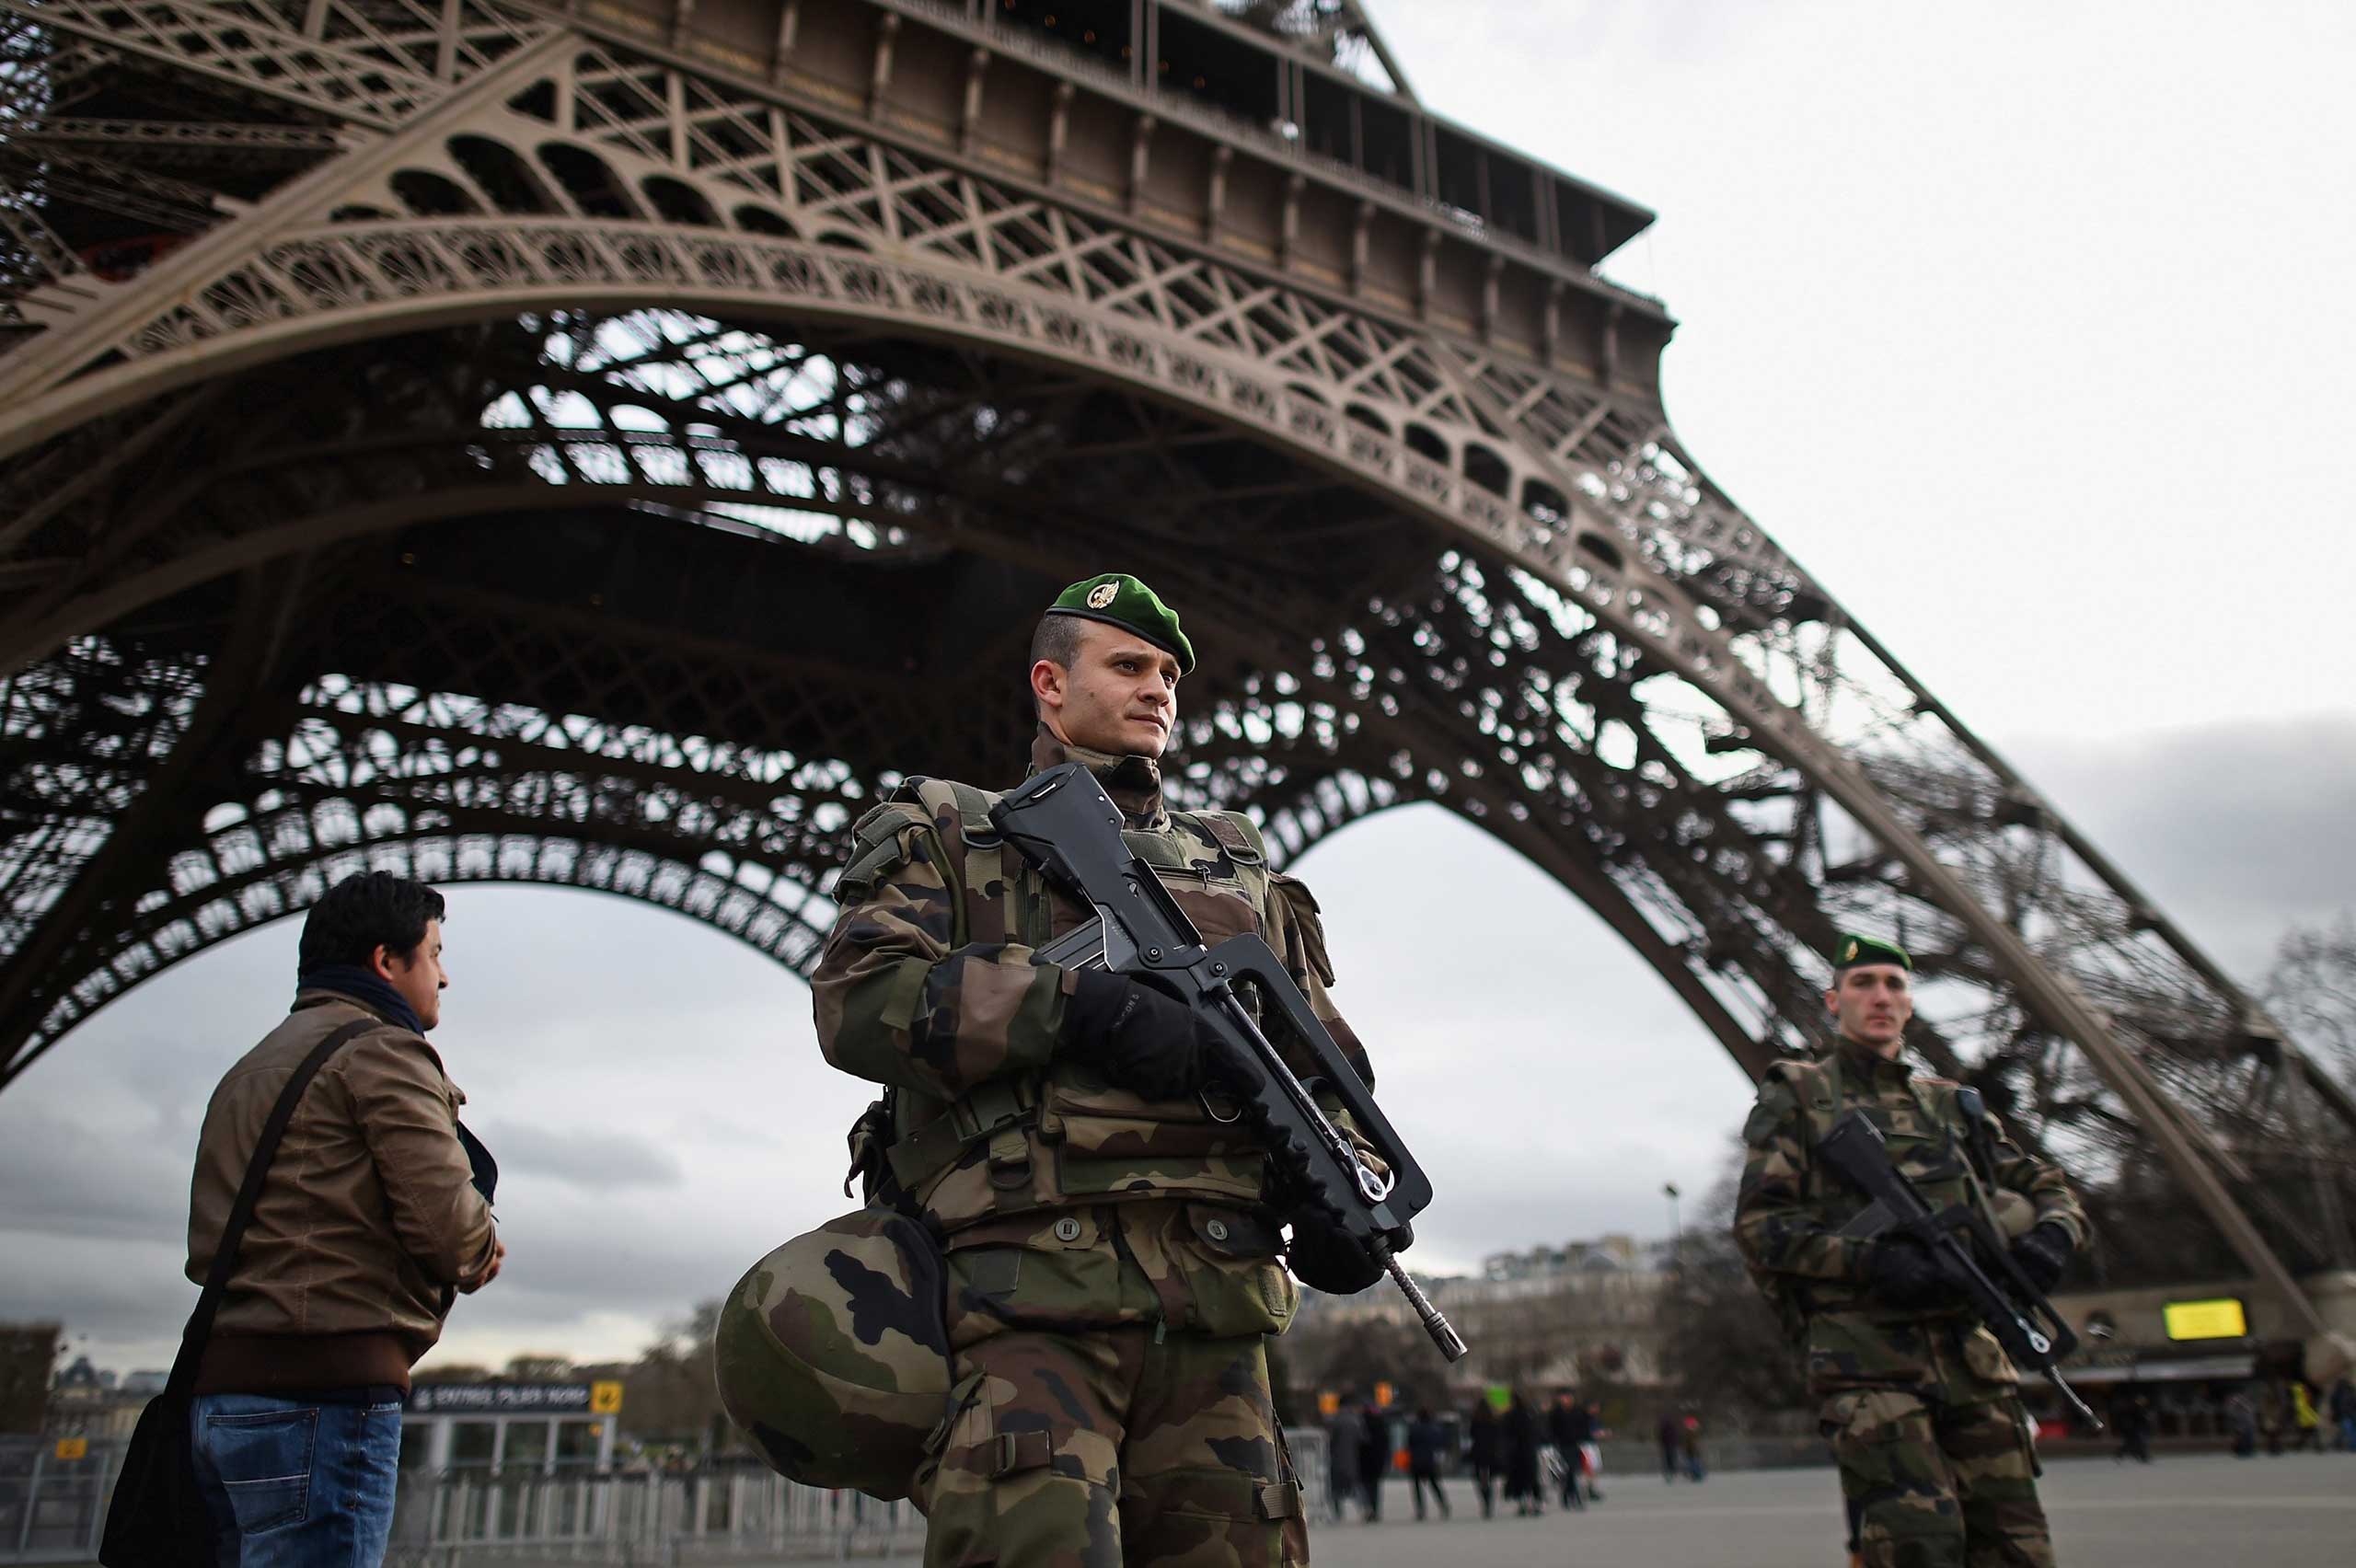 French troops patrol around the Eiffel Tower in Paris on Jan. 12, 2015 (Jeff J Mitchell—Getty Images)